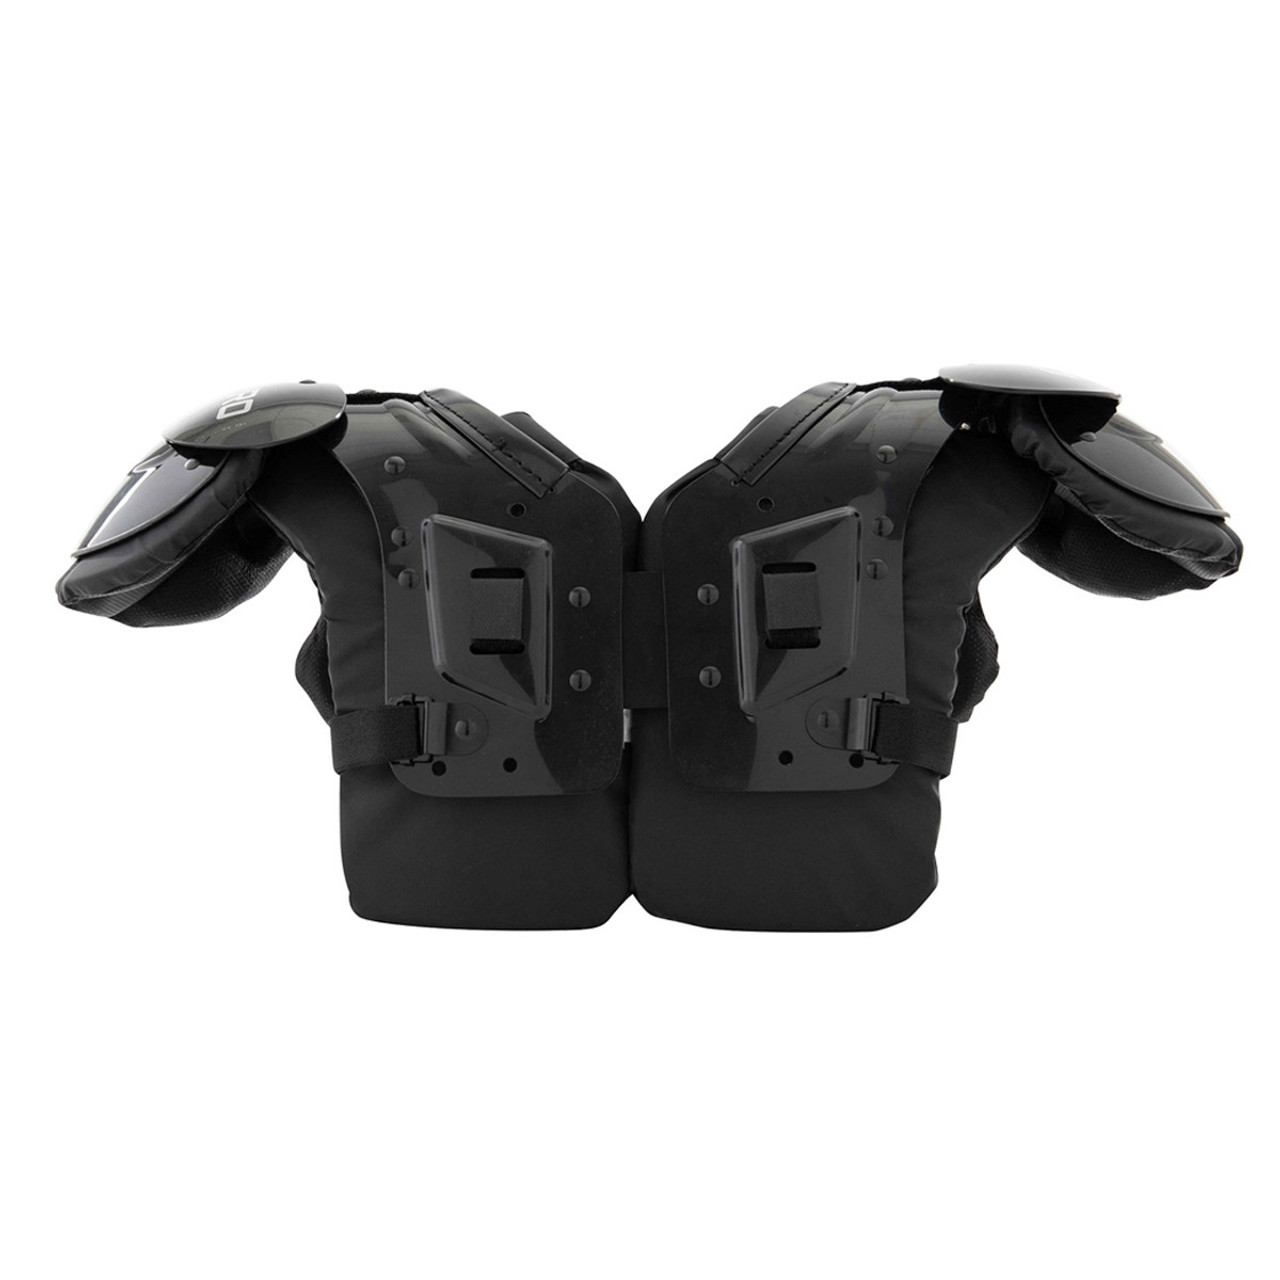 Champro Gauntlet Youth Football Shoulder Pads